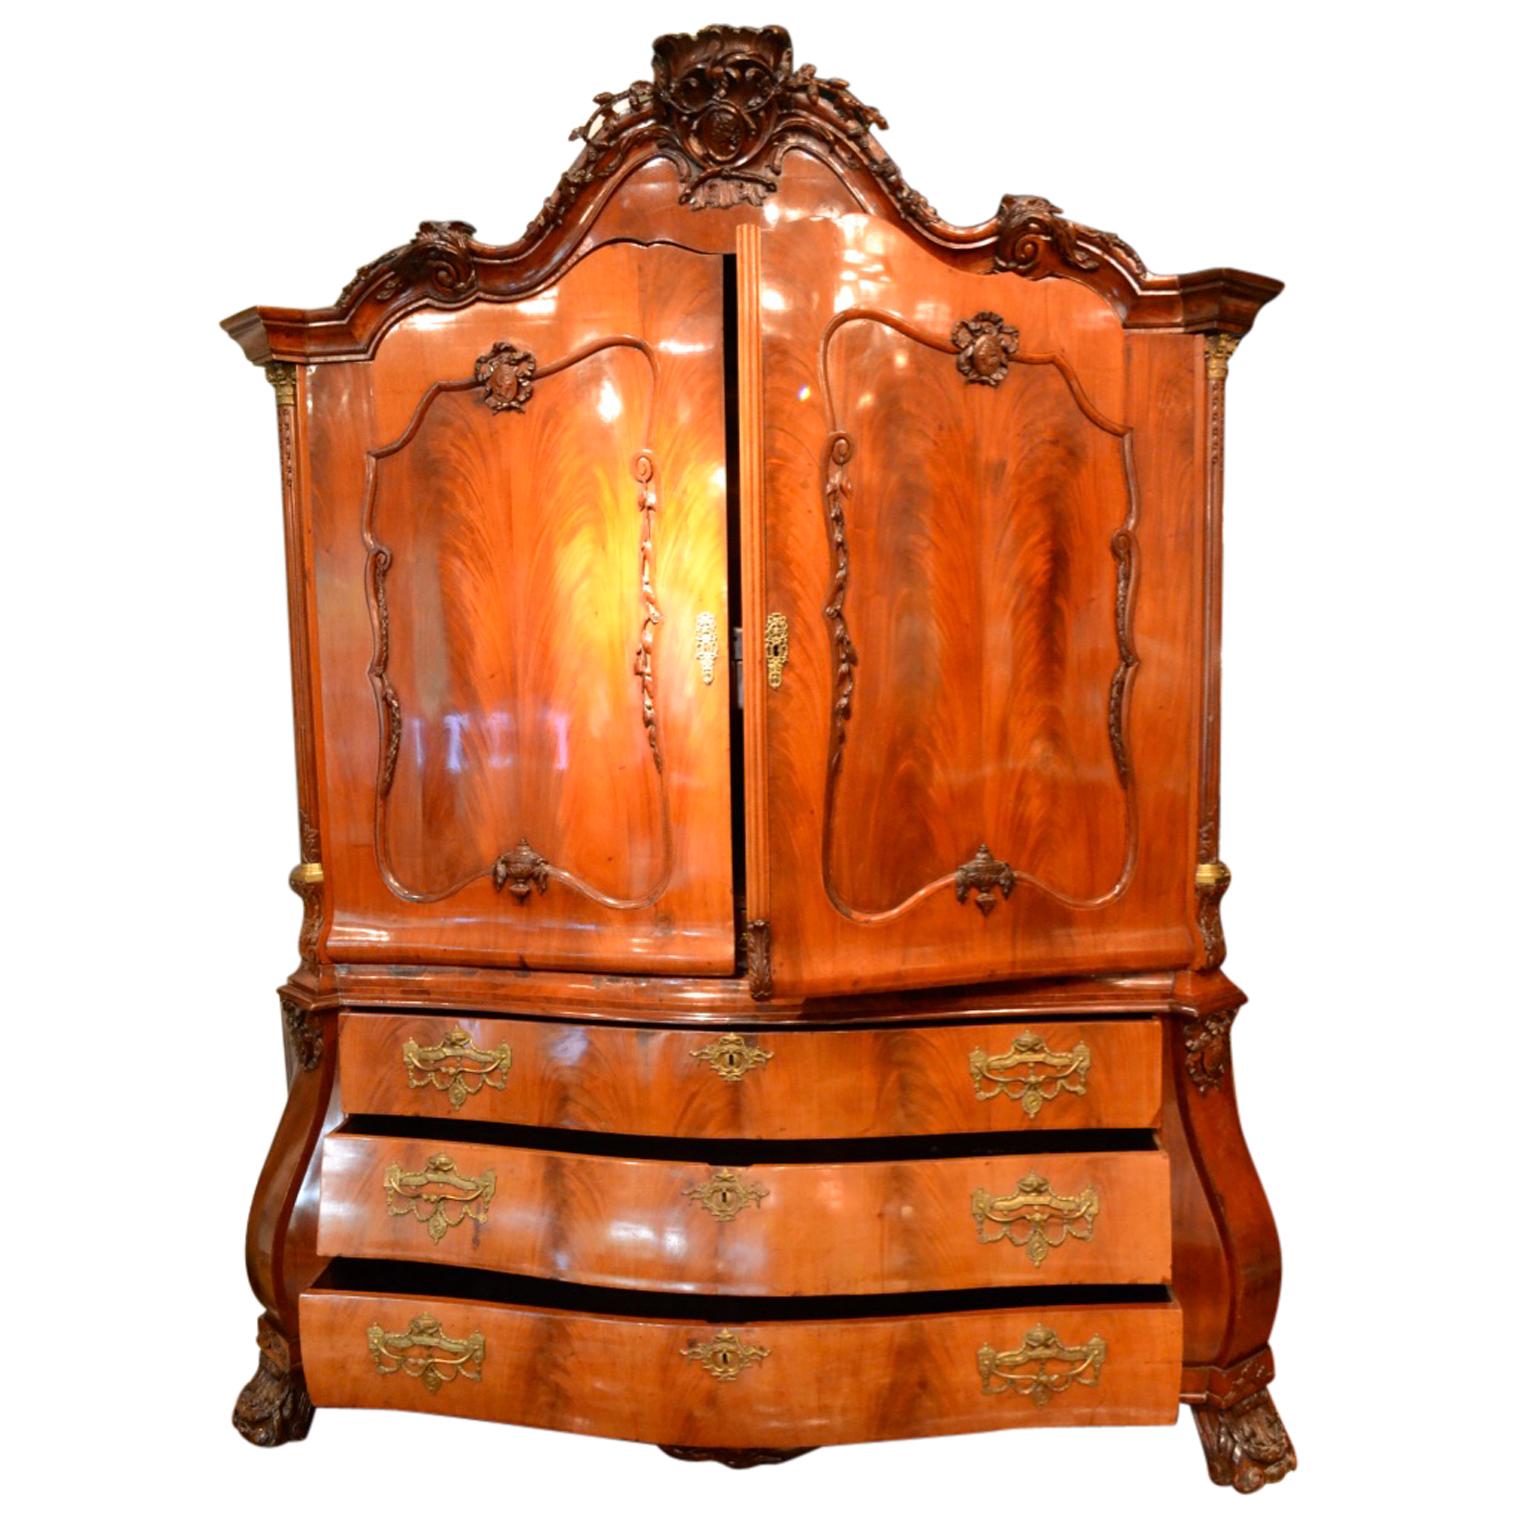 A Louis XV period Dutch mahogany armoire and chest of drawers that in its time would have been used as a linen press. The armoire is topped with a serpentine carved cartouche showing a classical male head in profile wearing a wreath; inset in open